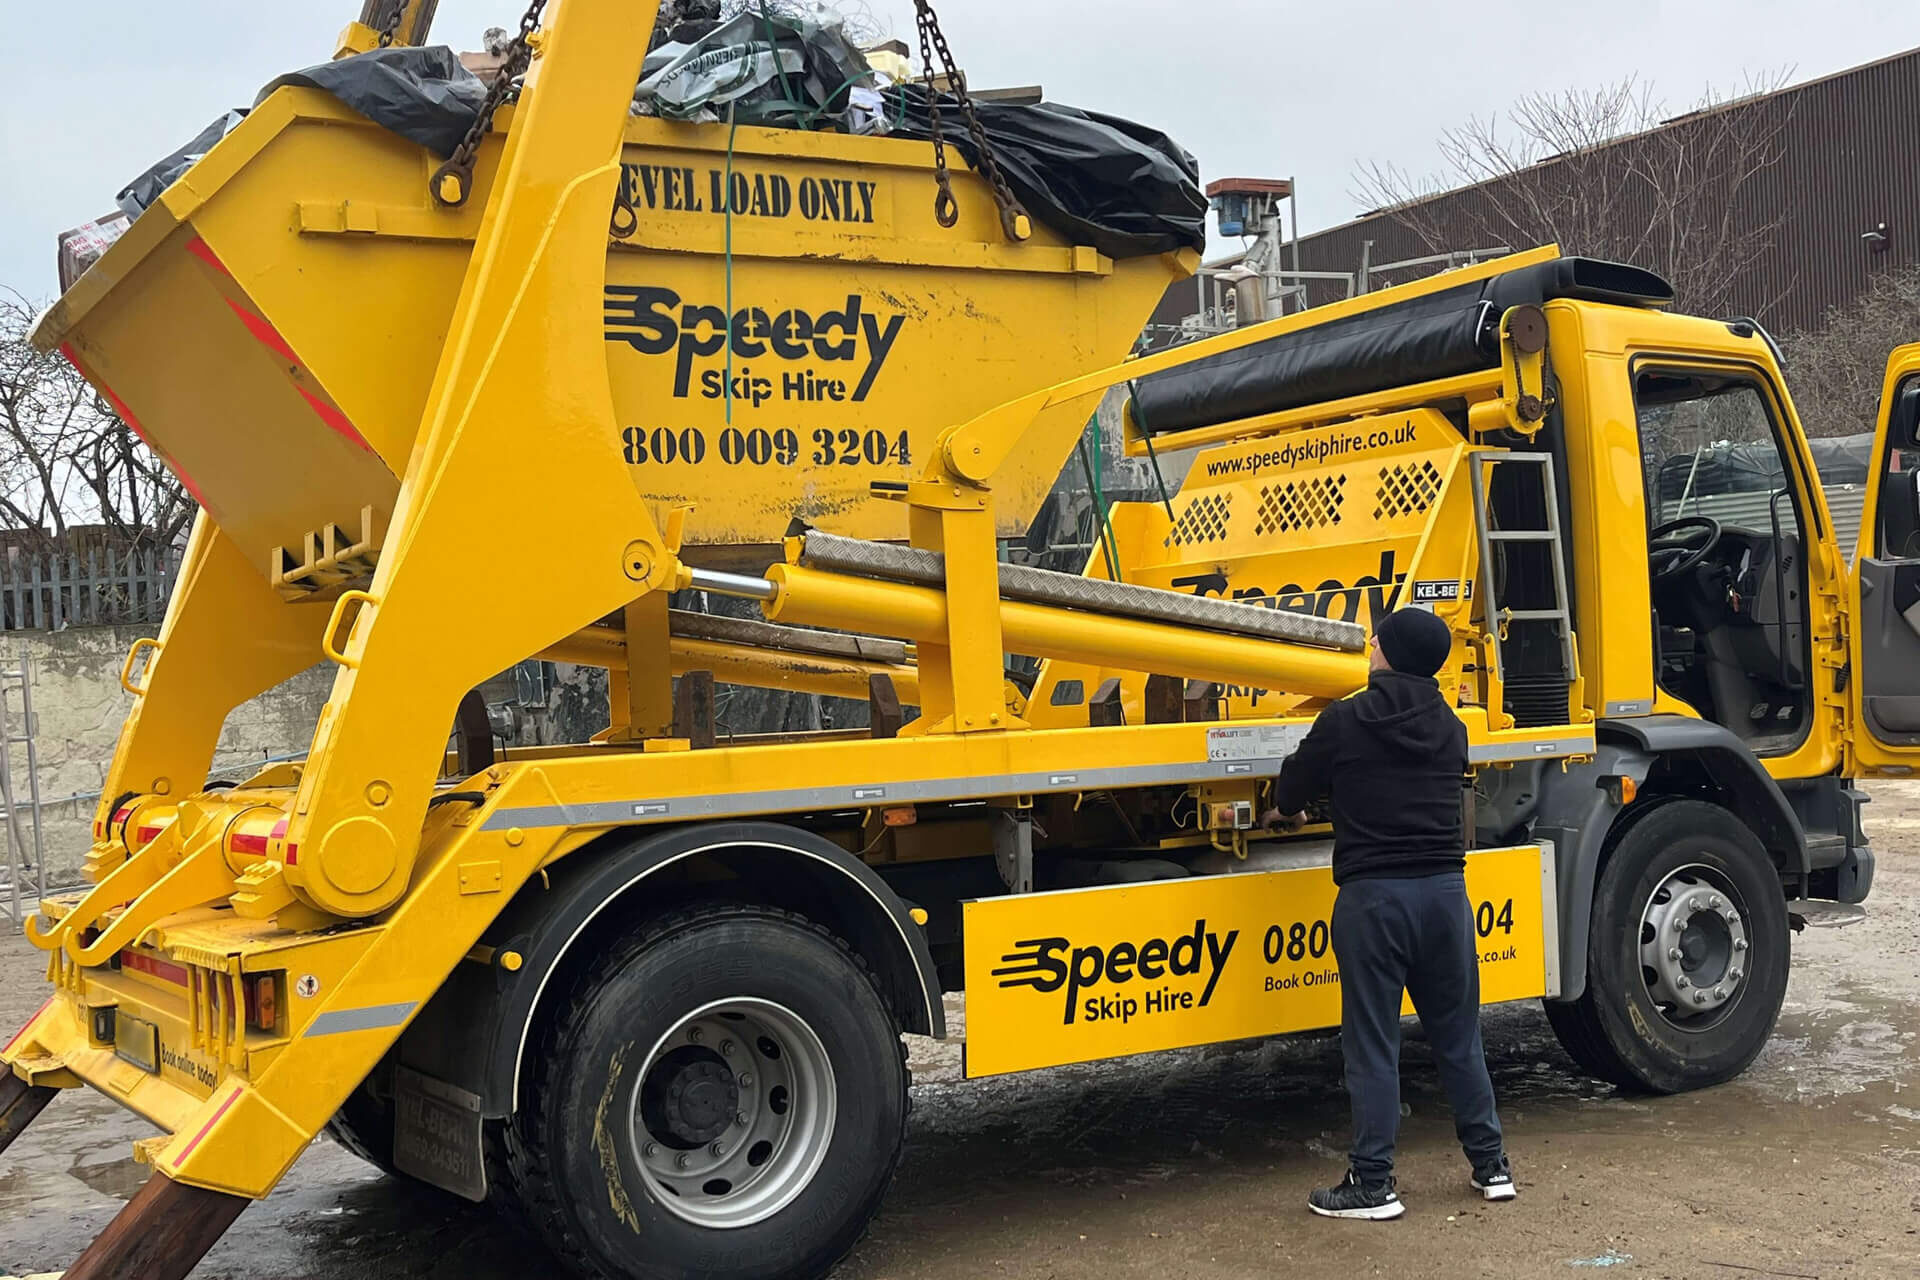 Quality Skip Hire & Waste Clearance near Surrey & Greater London